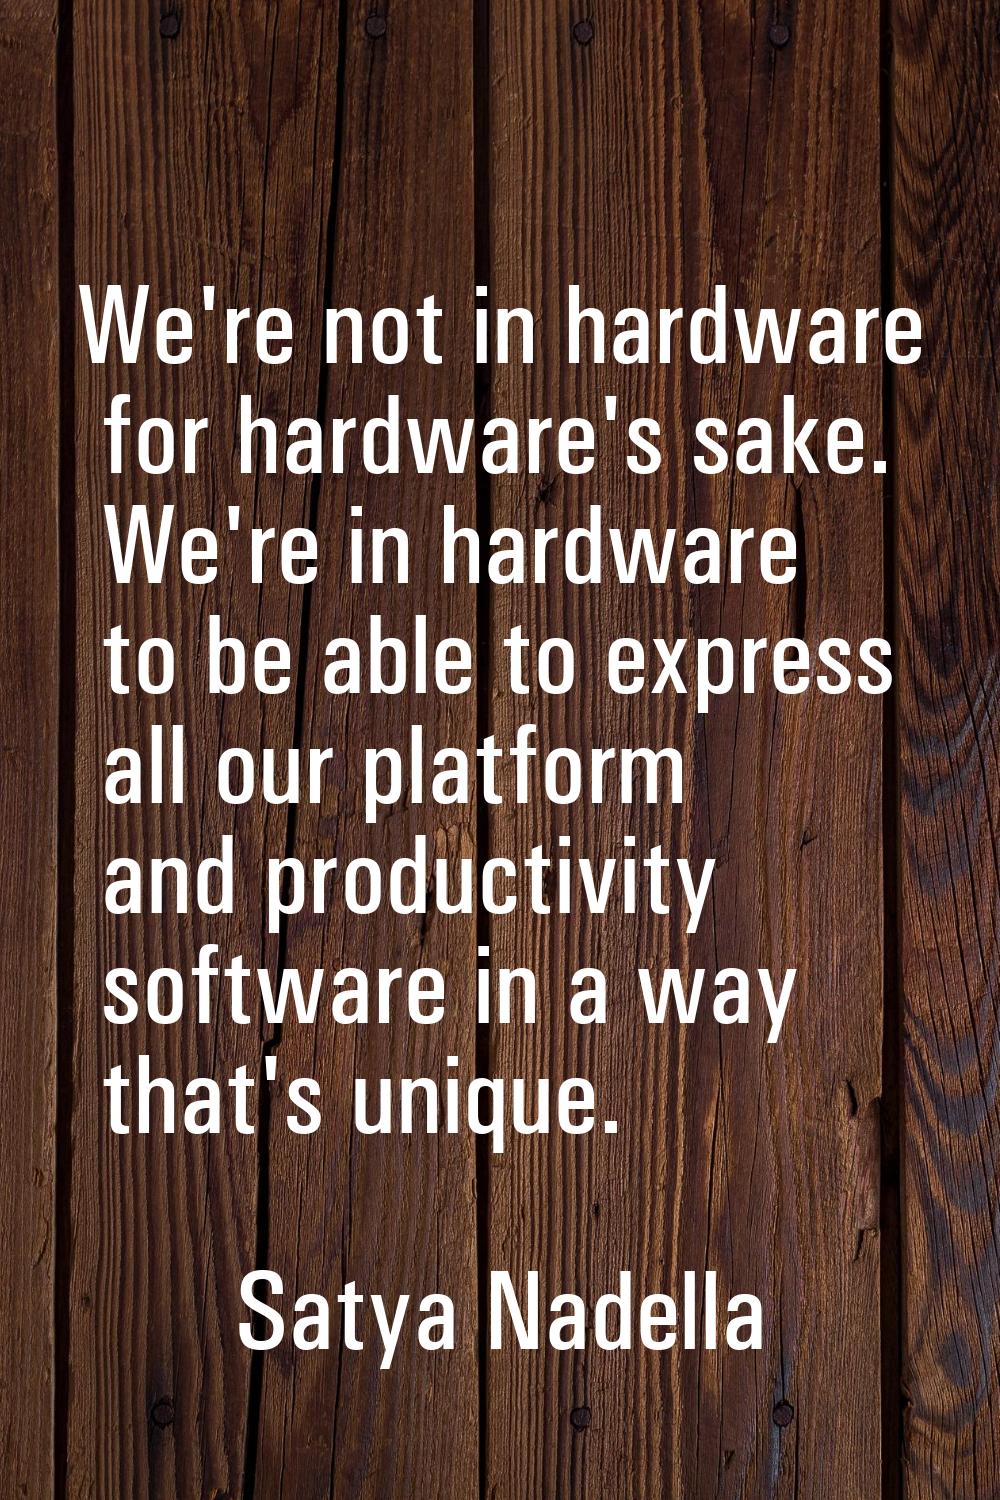 We're not in hardware for hardware's sake. We're in hardware to be able to express all our platform